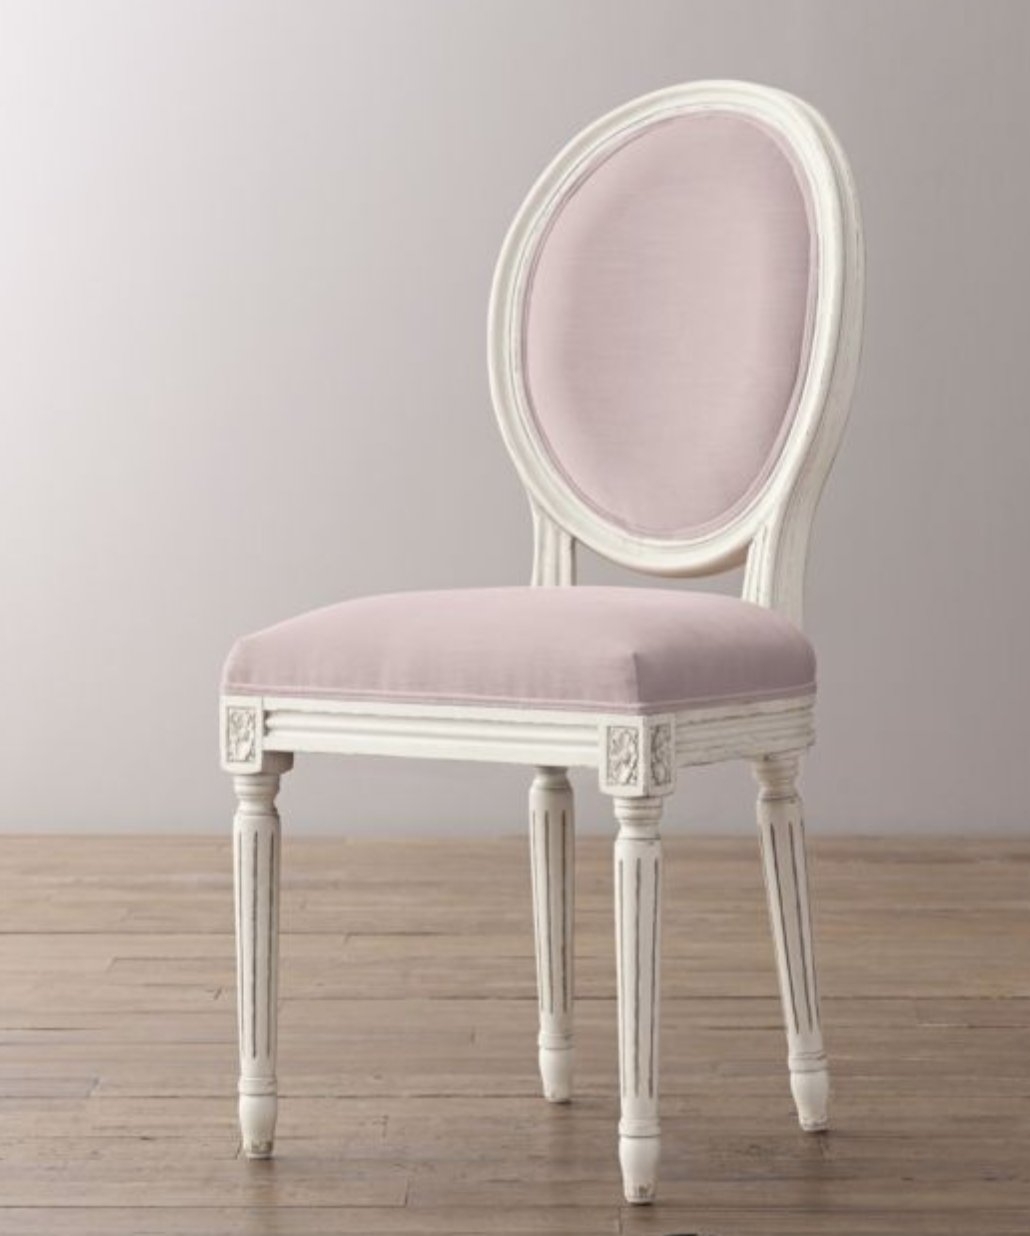 MINI VINTAGE FRENCH UPHOLSTERED CHAIR - AGED WHITE - Image 0